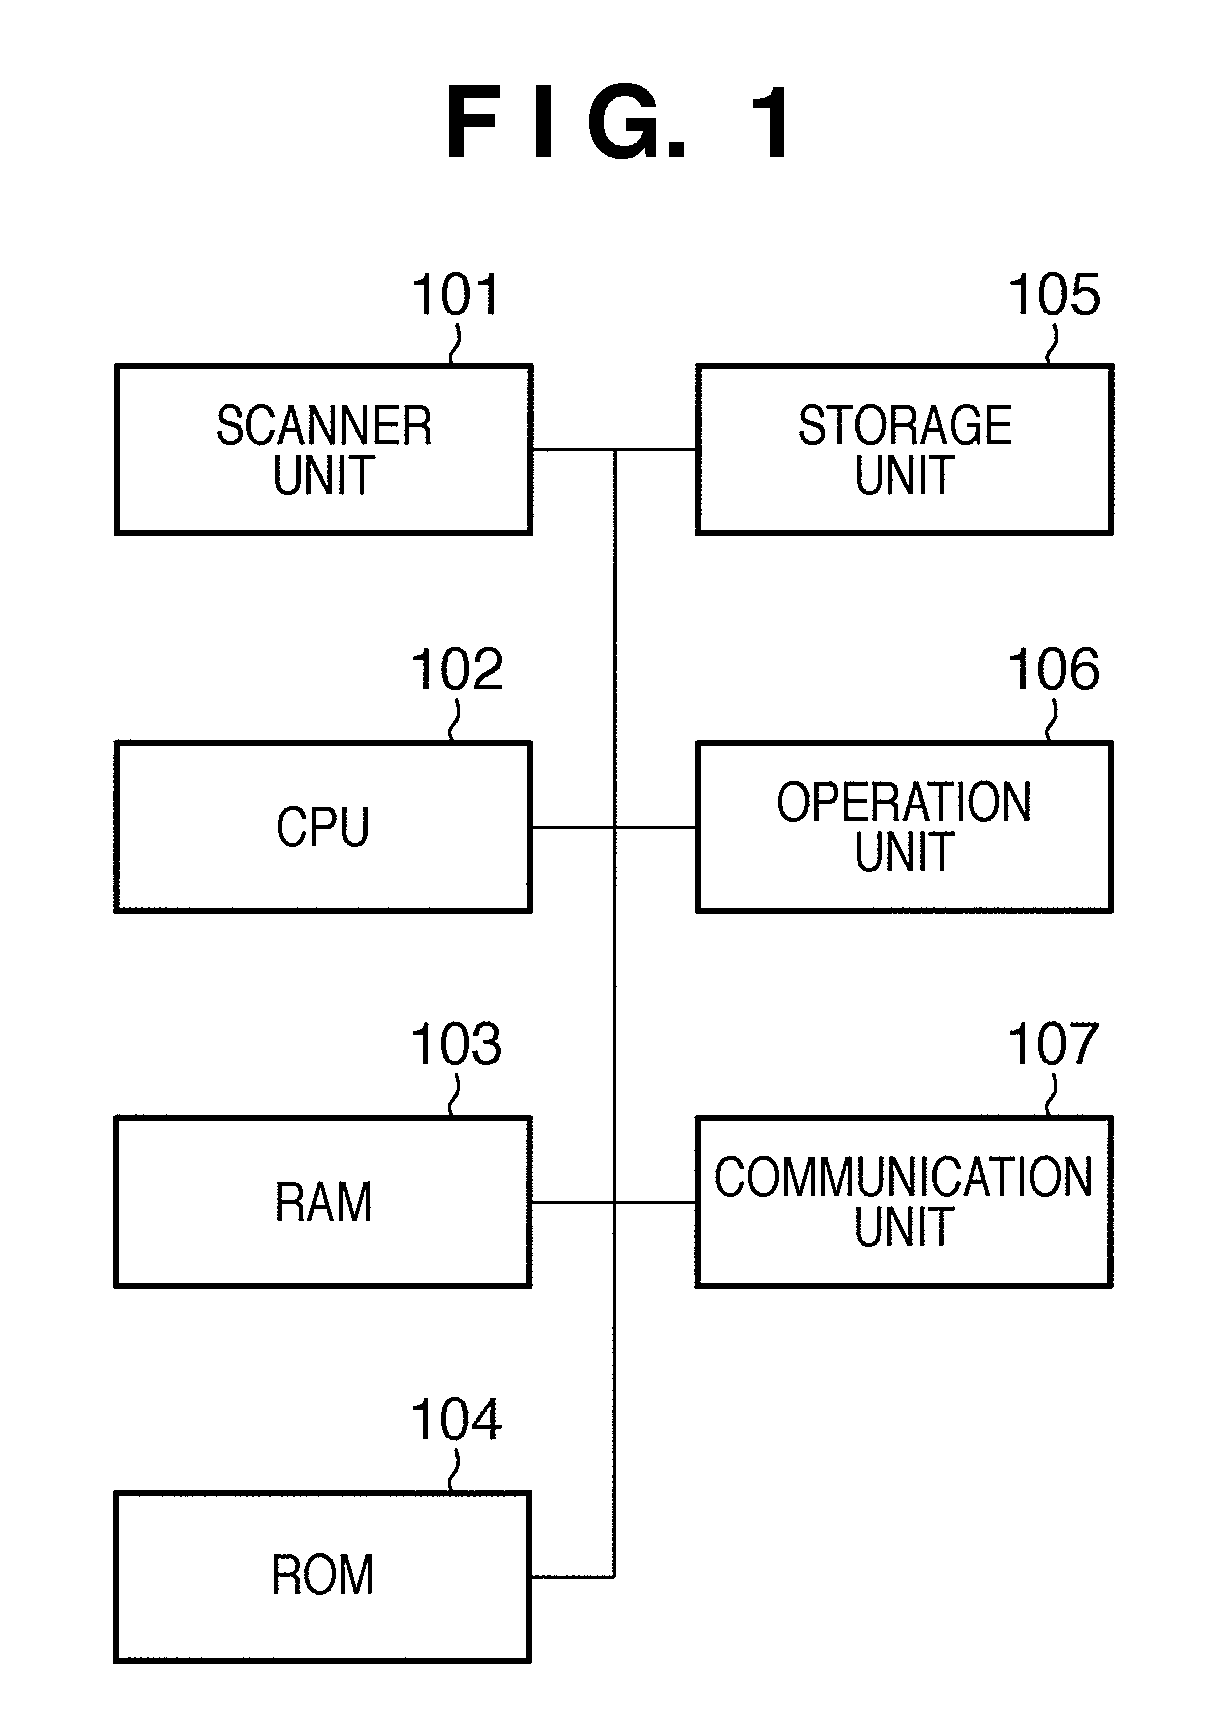 Managing modulation transfer function values for image data